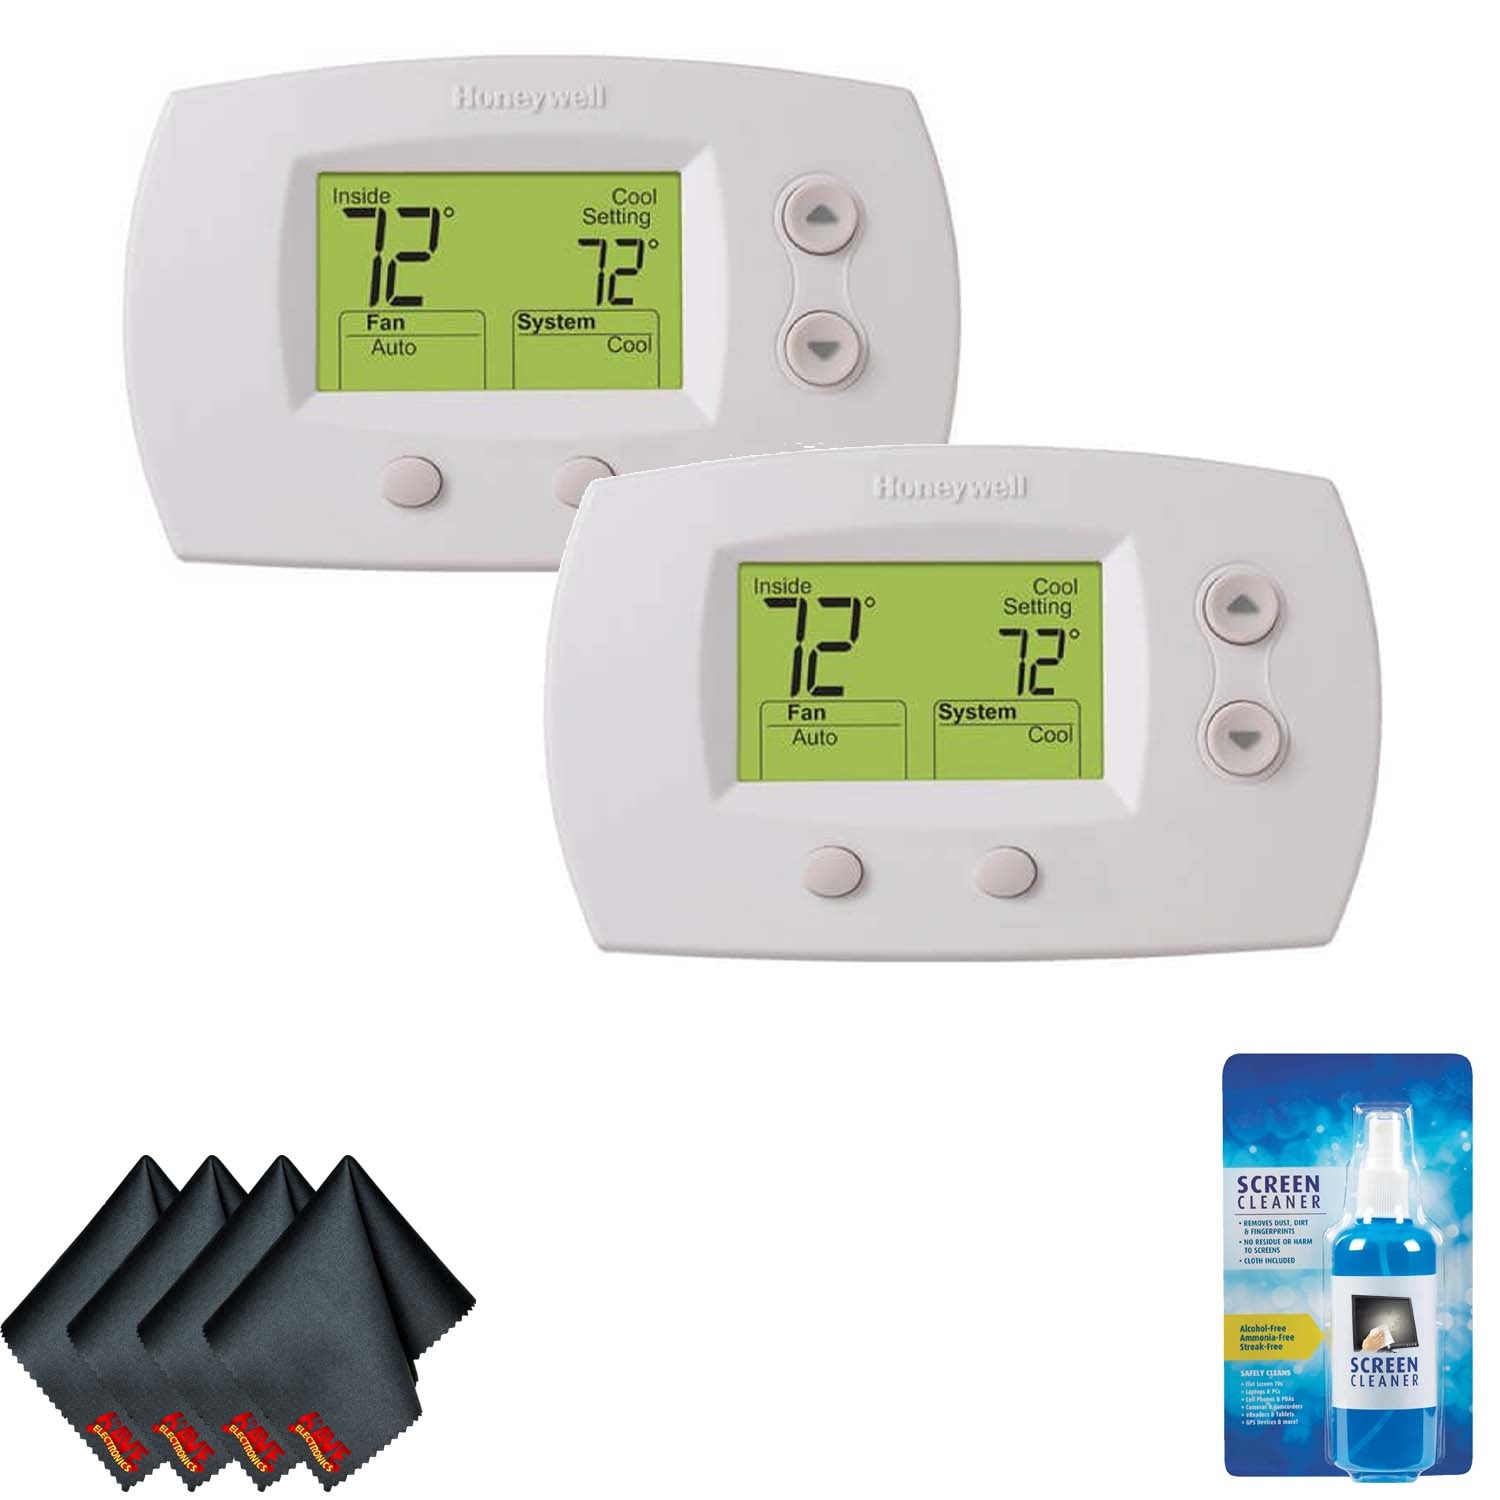 Honeywell TH5220D1029 Focuspro 5000 Non-Programmable Thermostat (2-Pack) Bundle